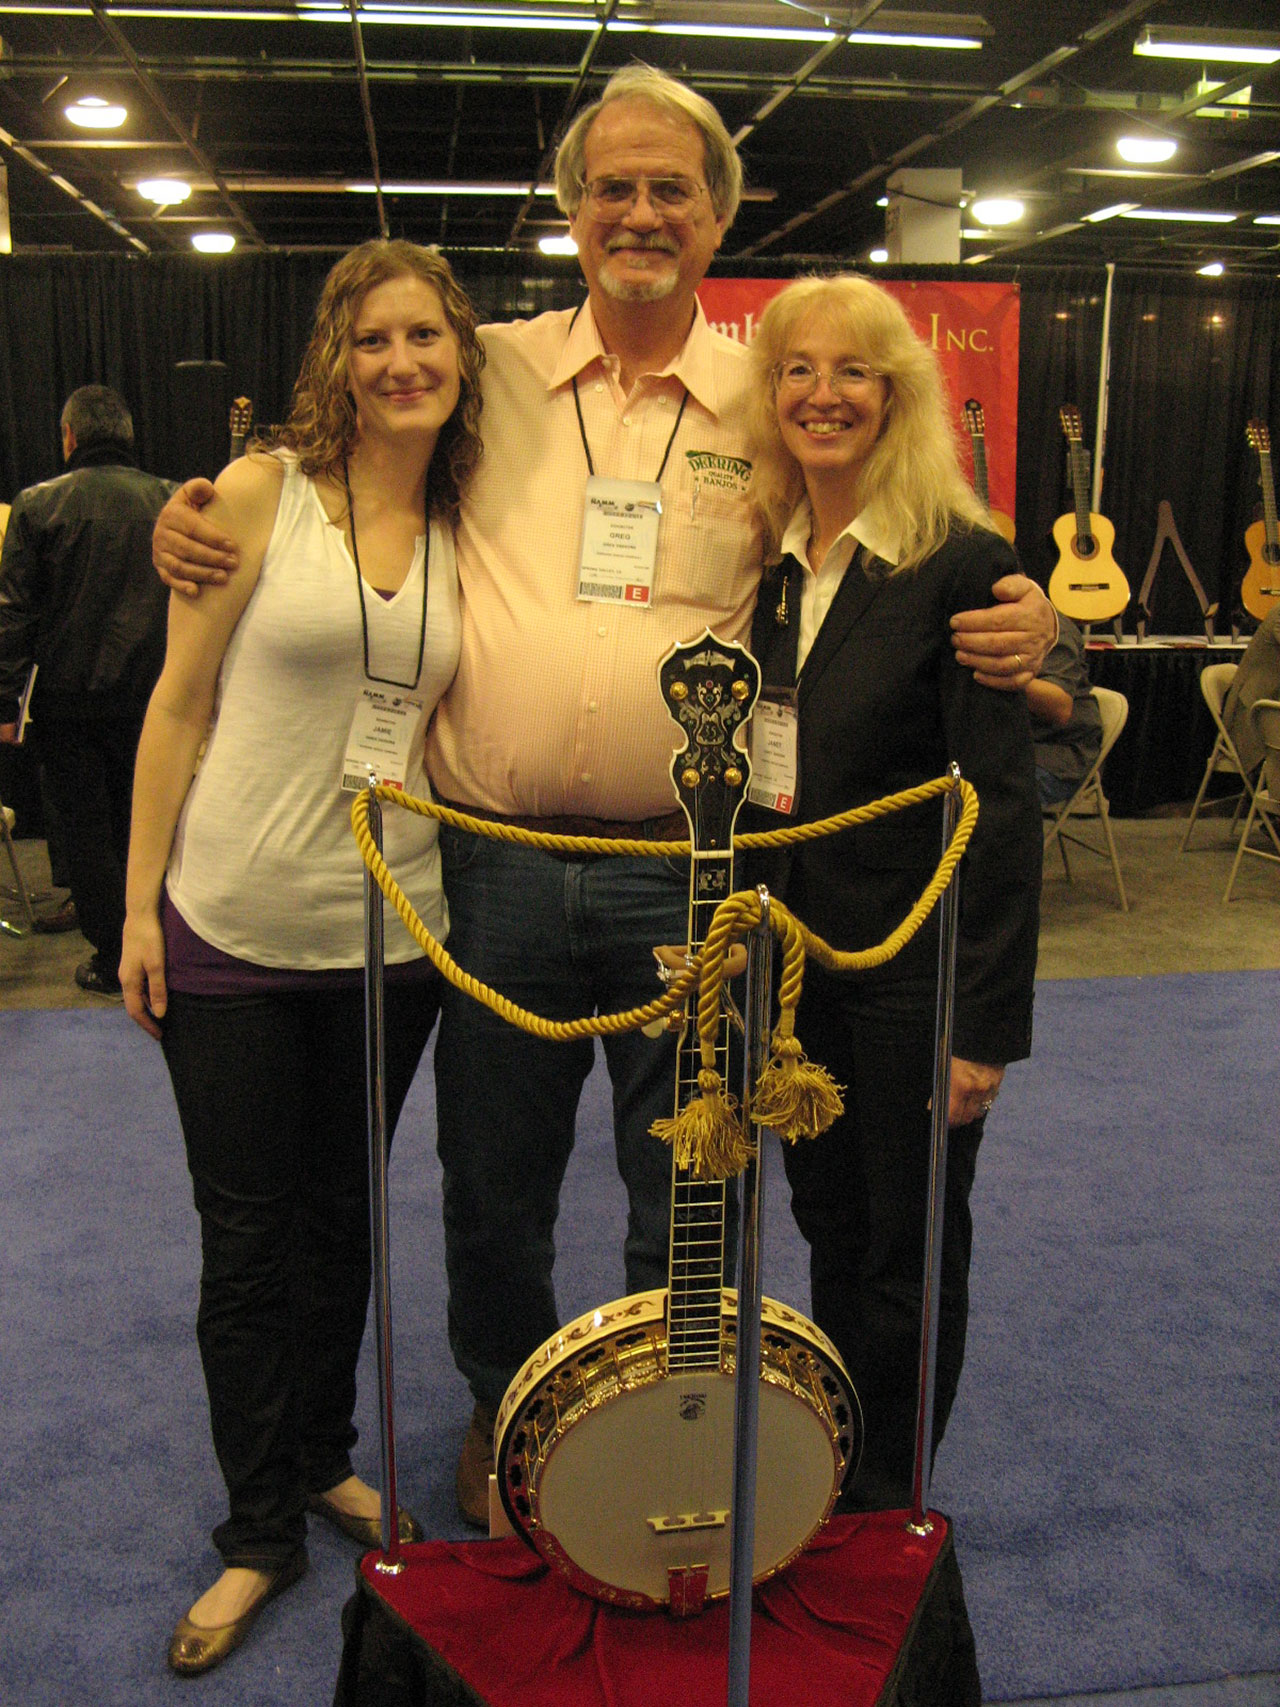 TDeerring 35th Anniversary Limited Edition Banjo  he Deering family with the 35th Anniverssary Banjo.